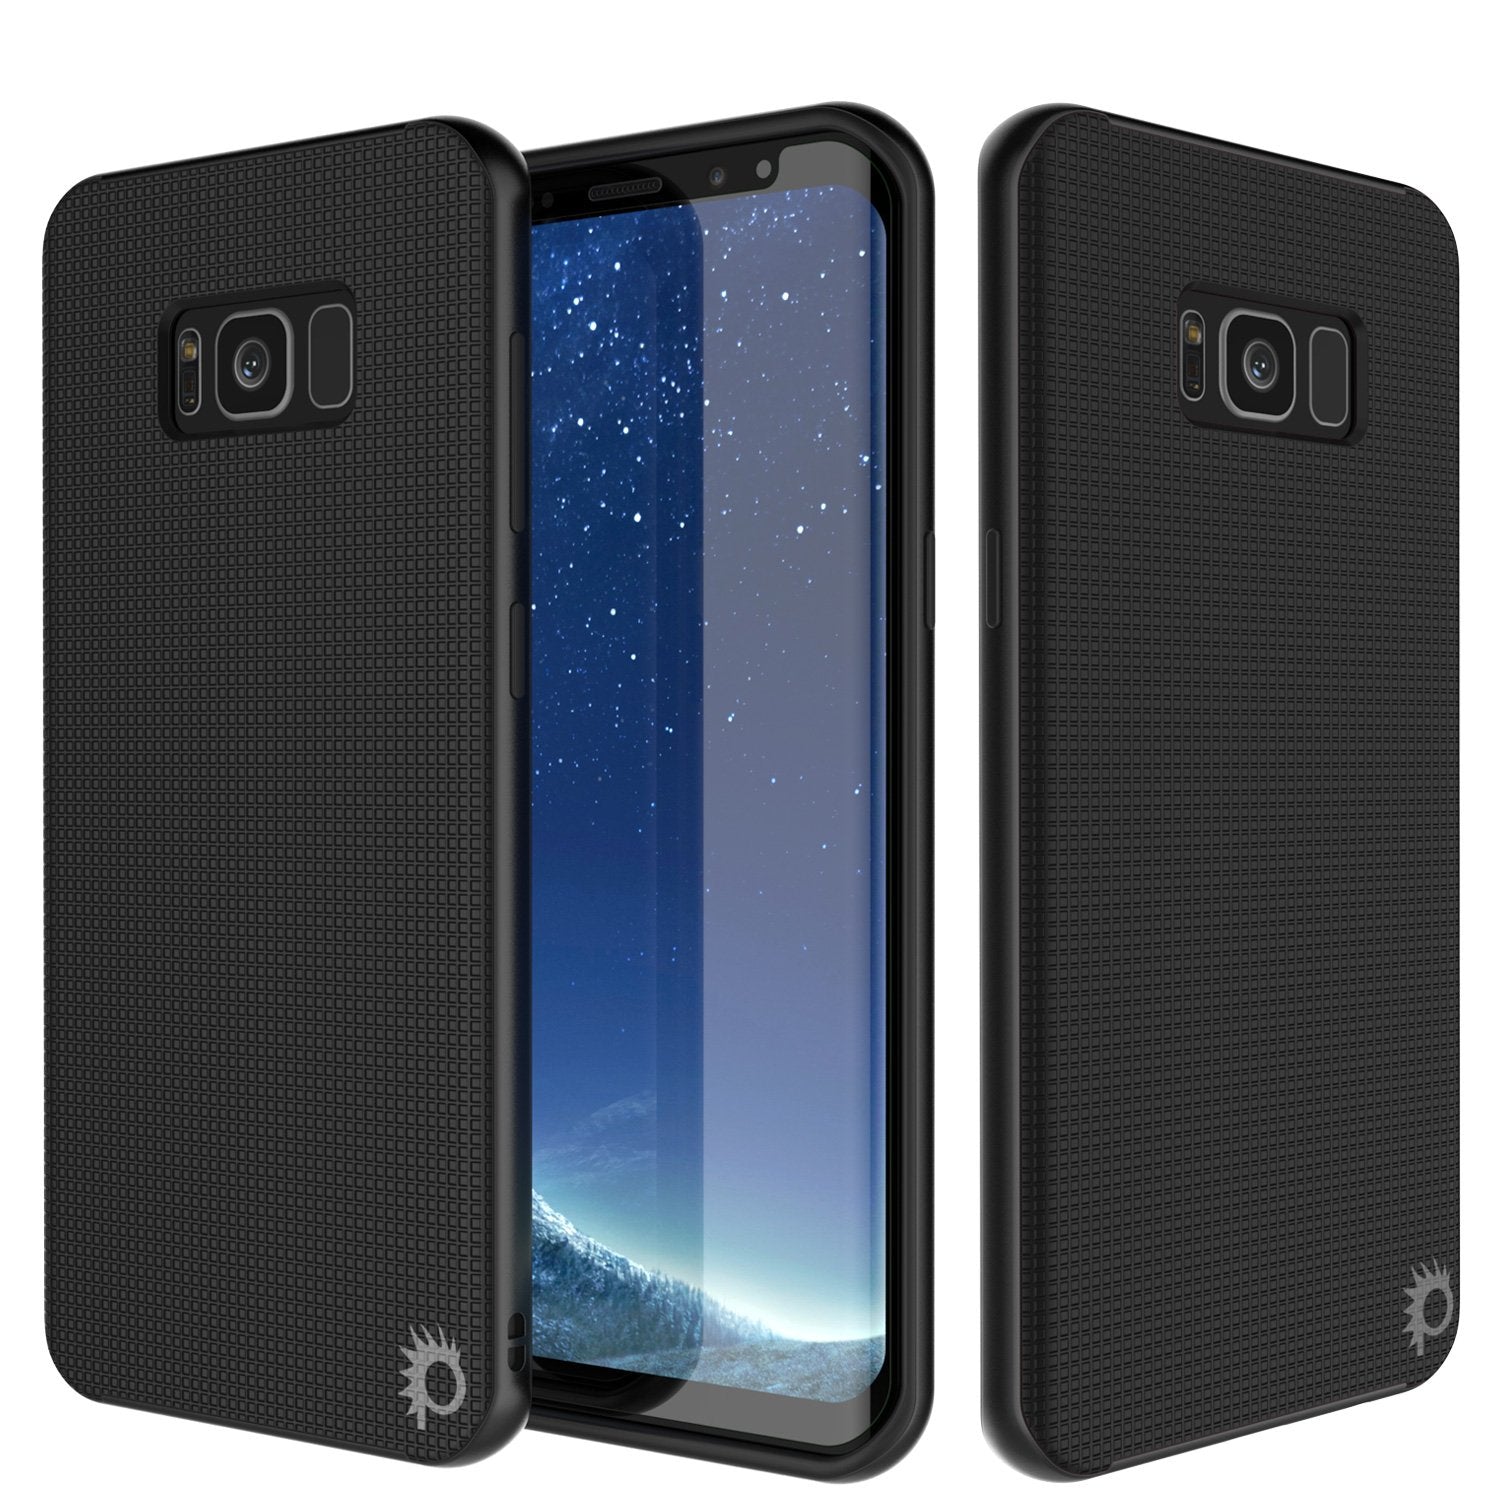 Galaxy S8 PLUS Case, PunkCase [Stealth Series] Hybrid 3-Piece Shockproof Dual Layer Cover [Non-Slip] [Soft TPU + PC Bumper] with PUNKSHIELD Screen Protector for Samsung S8+ [Black]